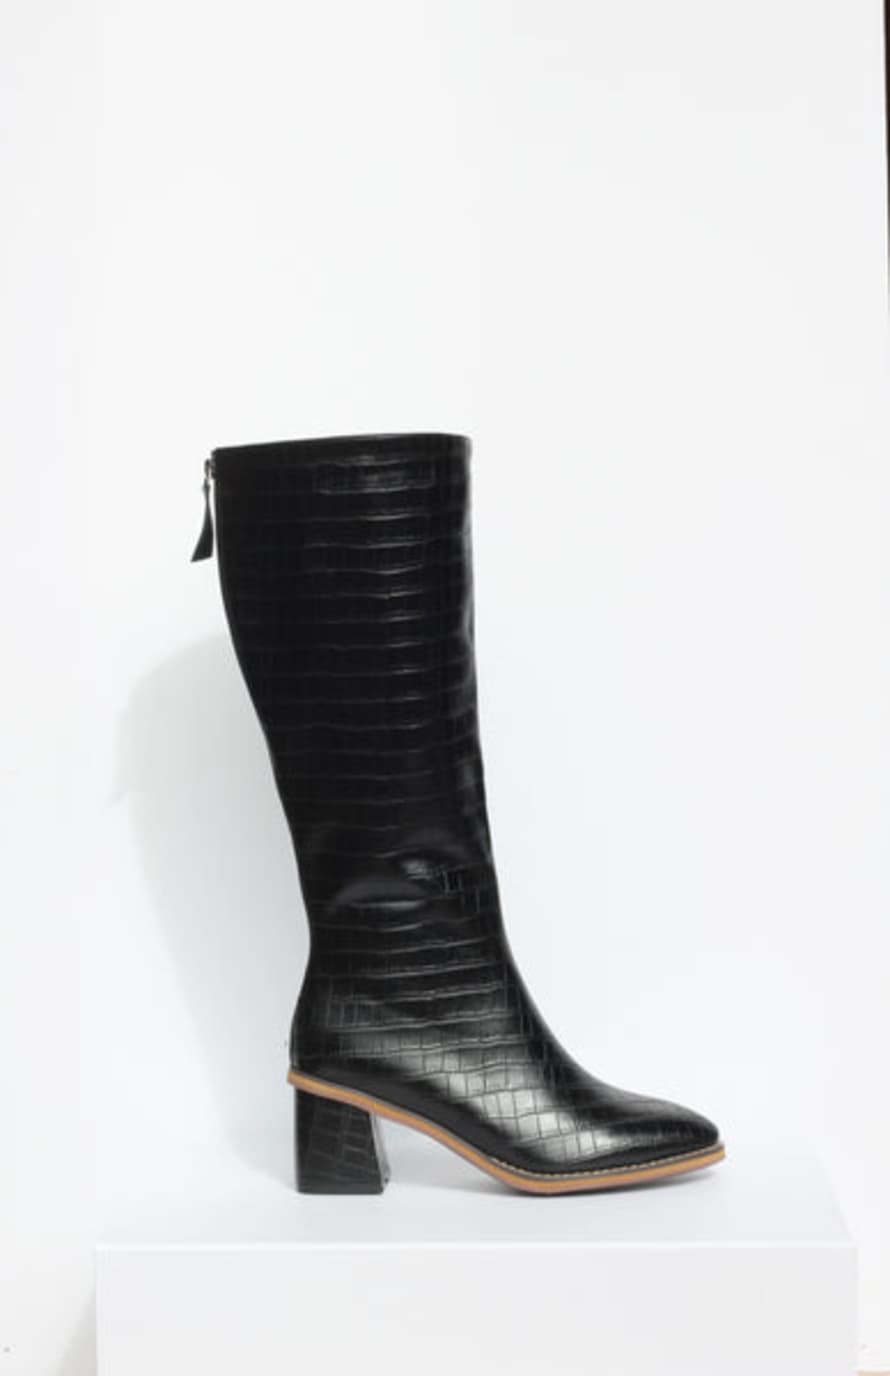 Collection & Co Giulia, Black Croc Knee High Boots